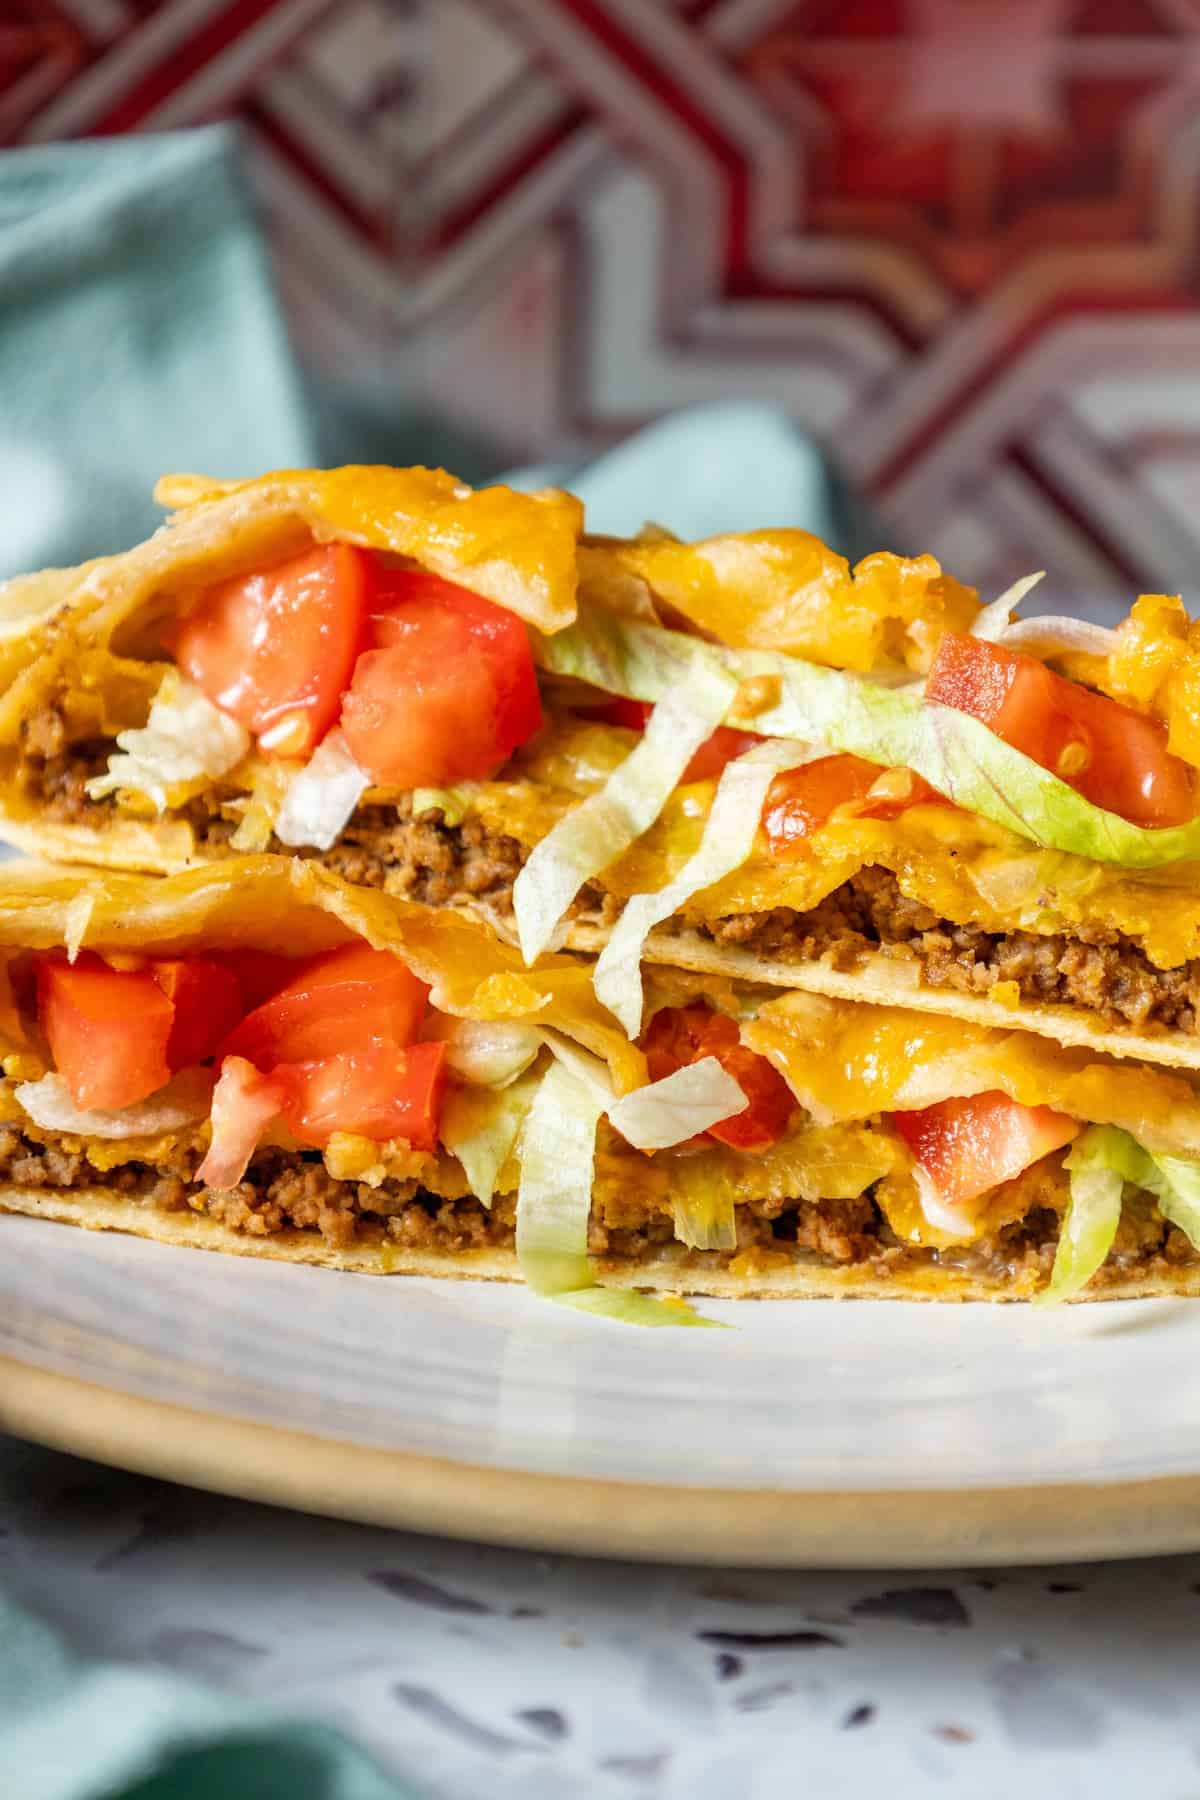 Two homemade quesadillas are stacked on a plate.